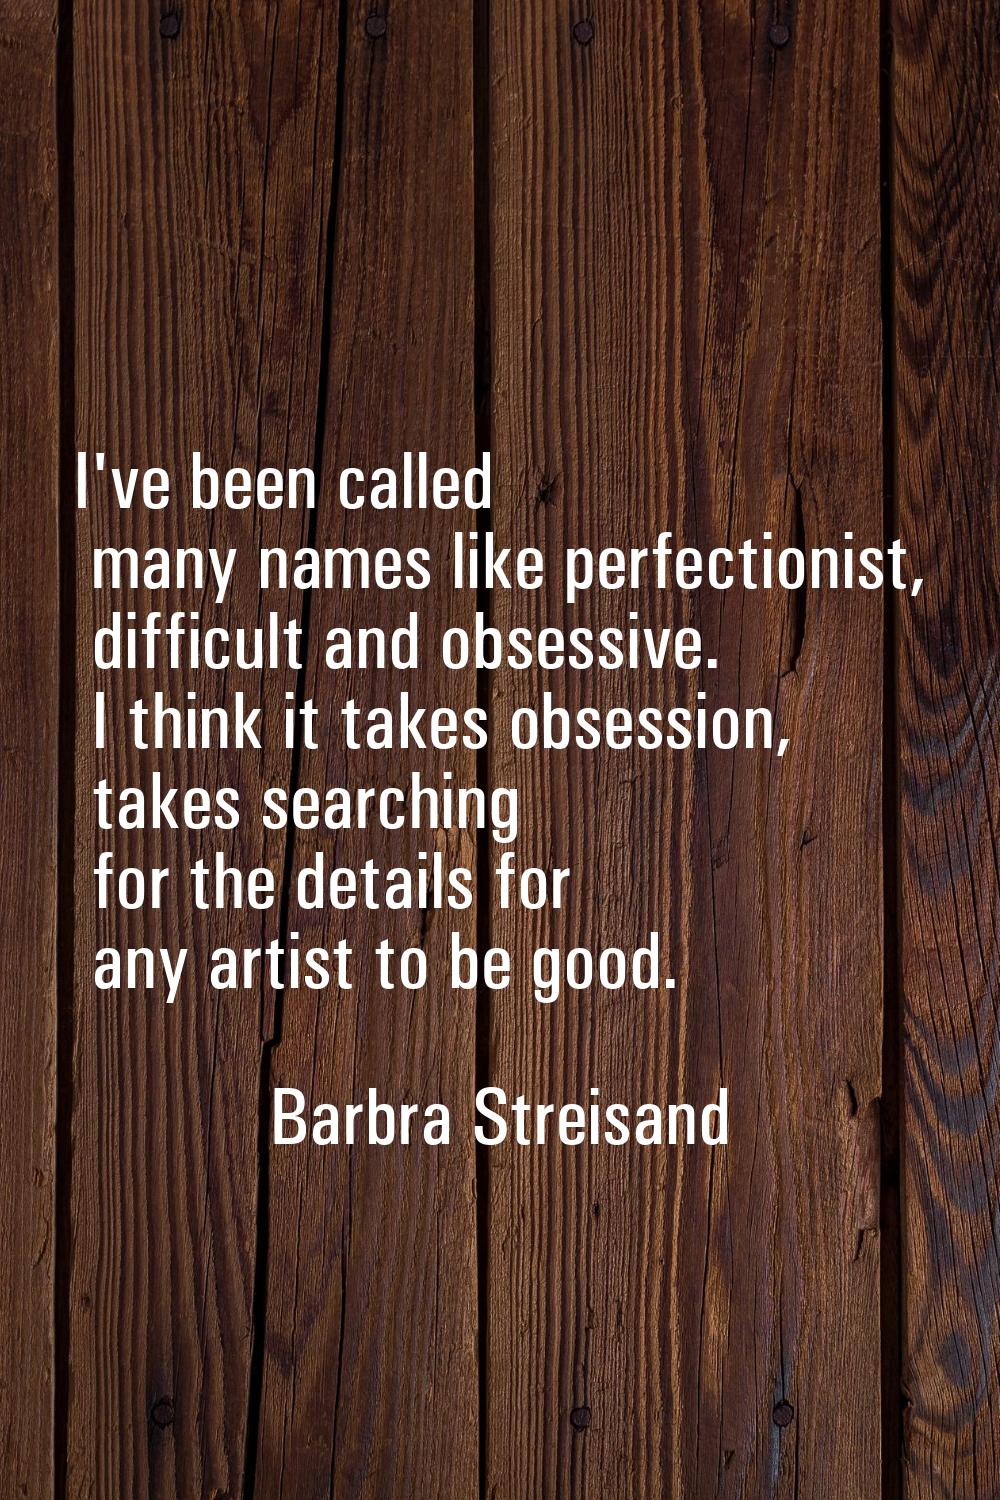 I've been called many names like perfectionist, difficult and obsessive. I think it takes obsession